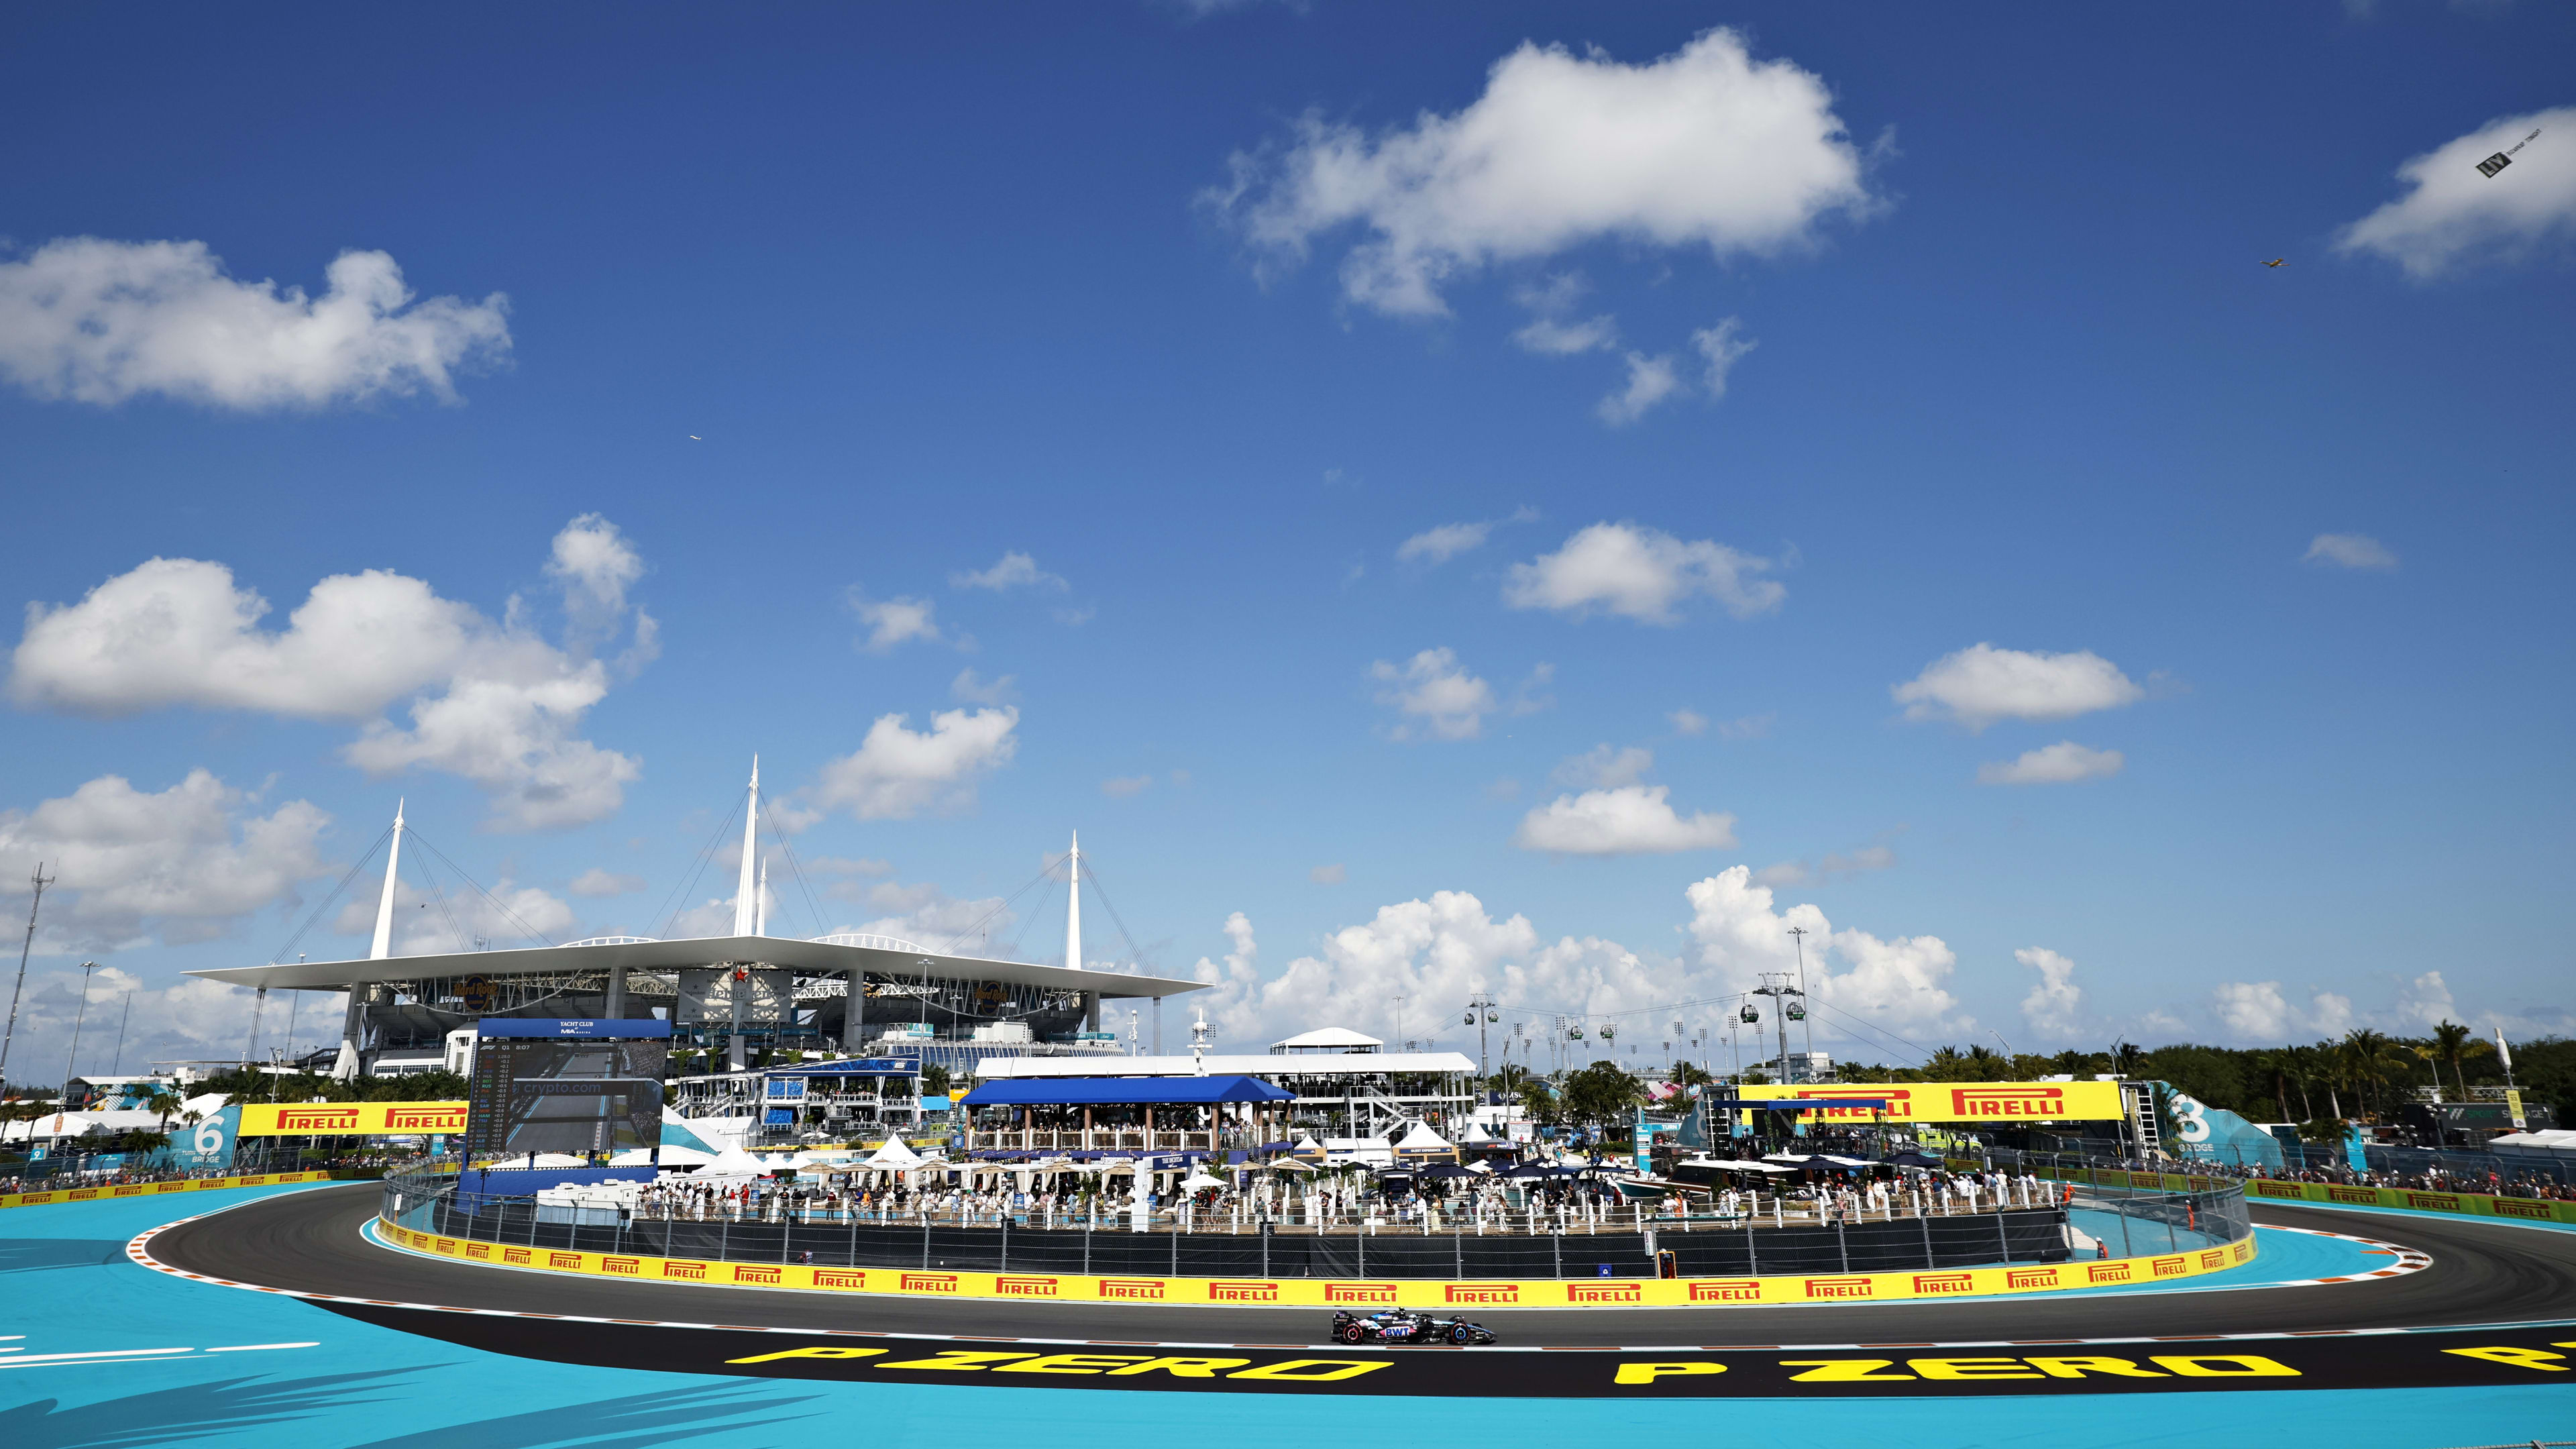 LIVE COVERAGE: Follow all the action from the Miami Grand Prix